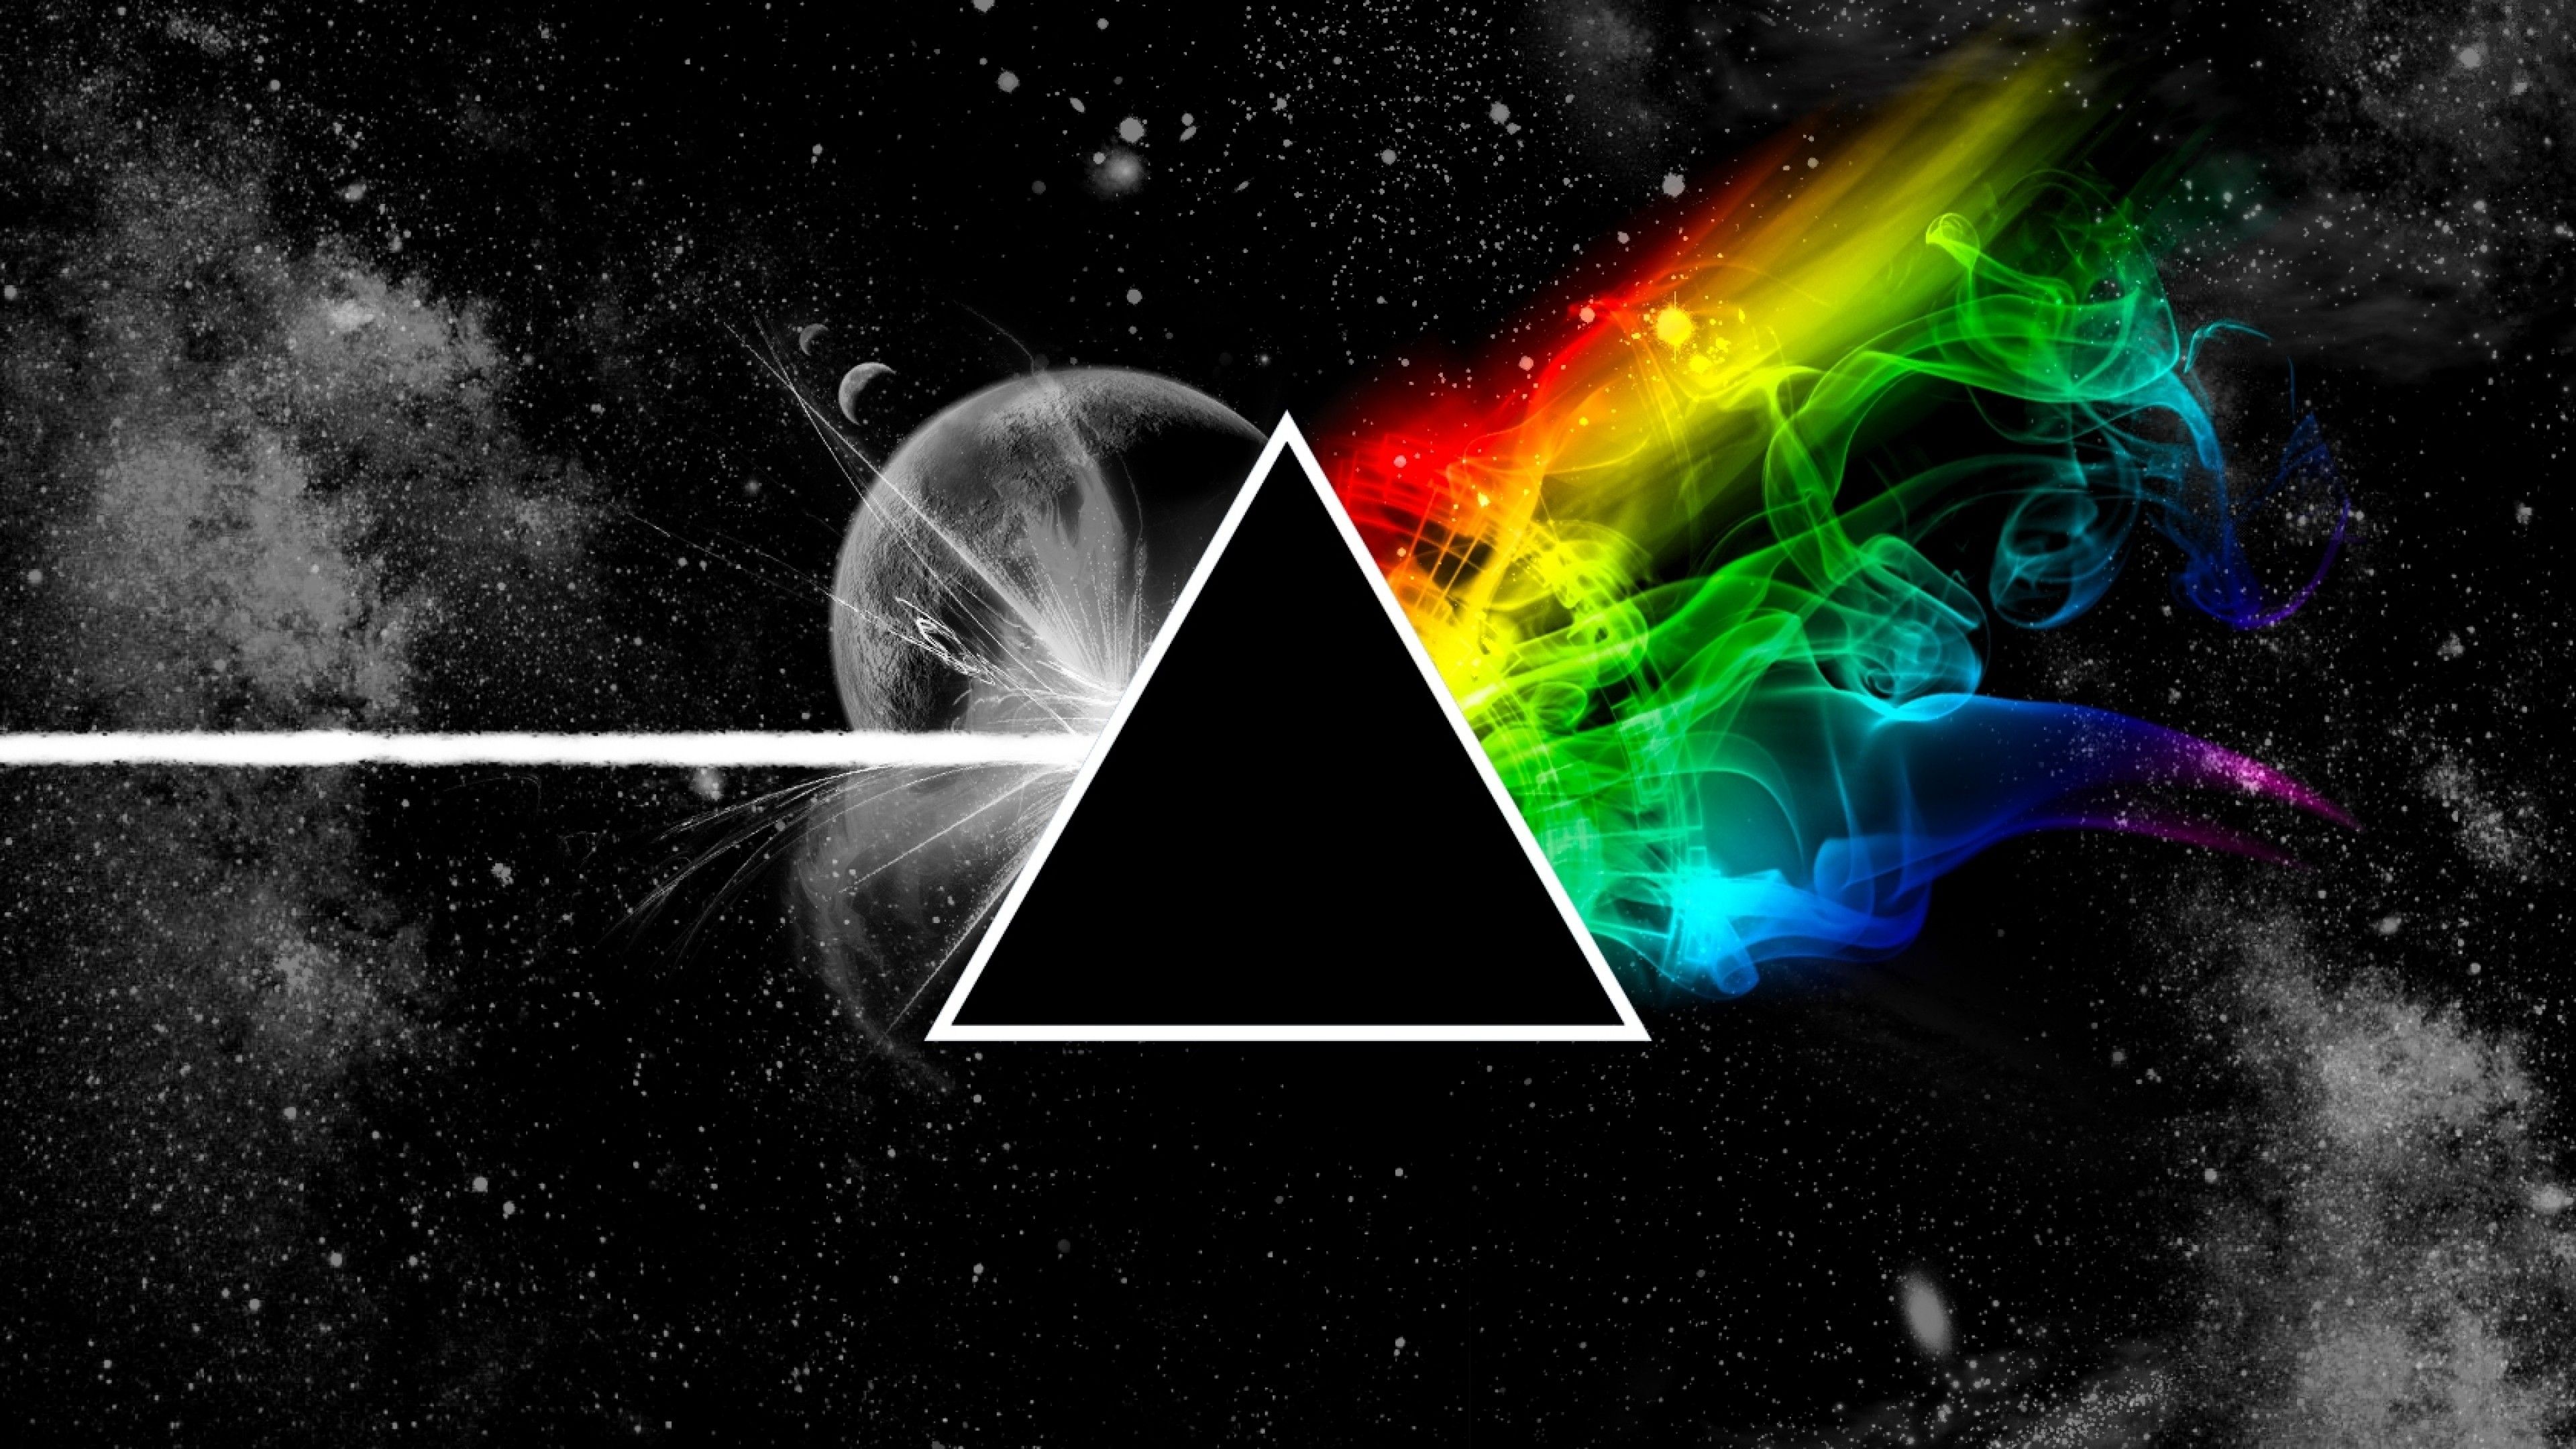 Dark Side Of The Moon Wallpaper 68 images